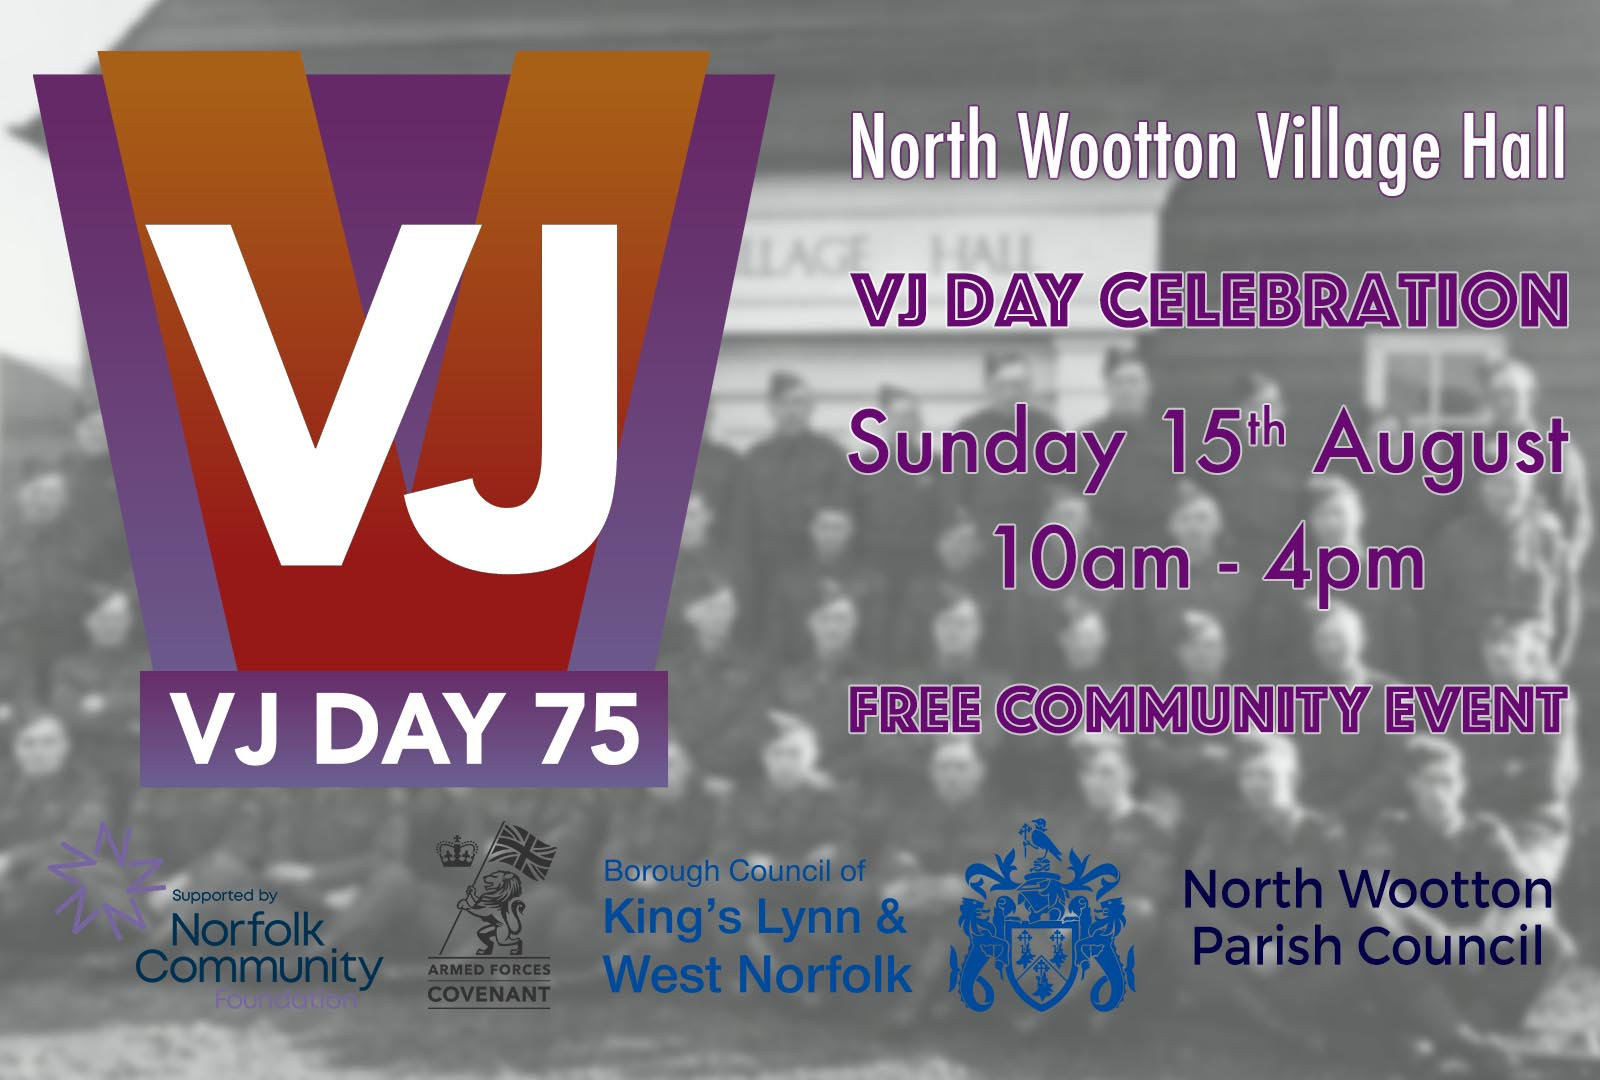 VJ Day Celebration, North Wootton Village Hall, Priory Lane, North Wootton, Norfolk, PE30 3PT | A celebration of the 75th anniversary of the end of World War II (postponed from 2020) | VJ day, War, Free, North Wootton, North West norfolk, West Norfolk, Kings Lynn